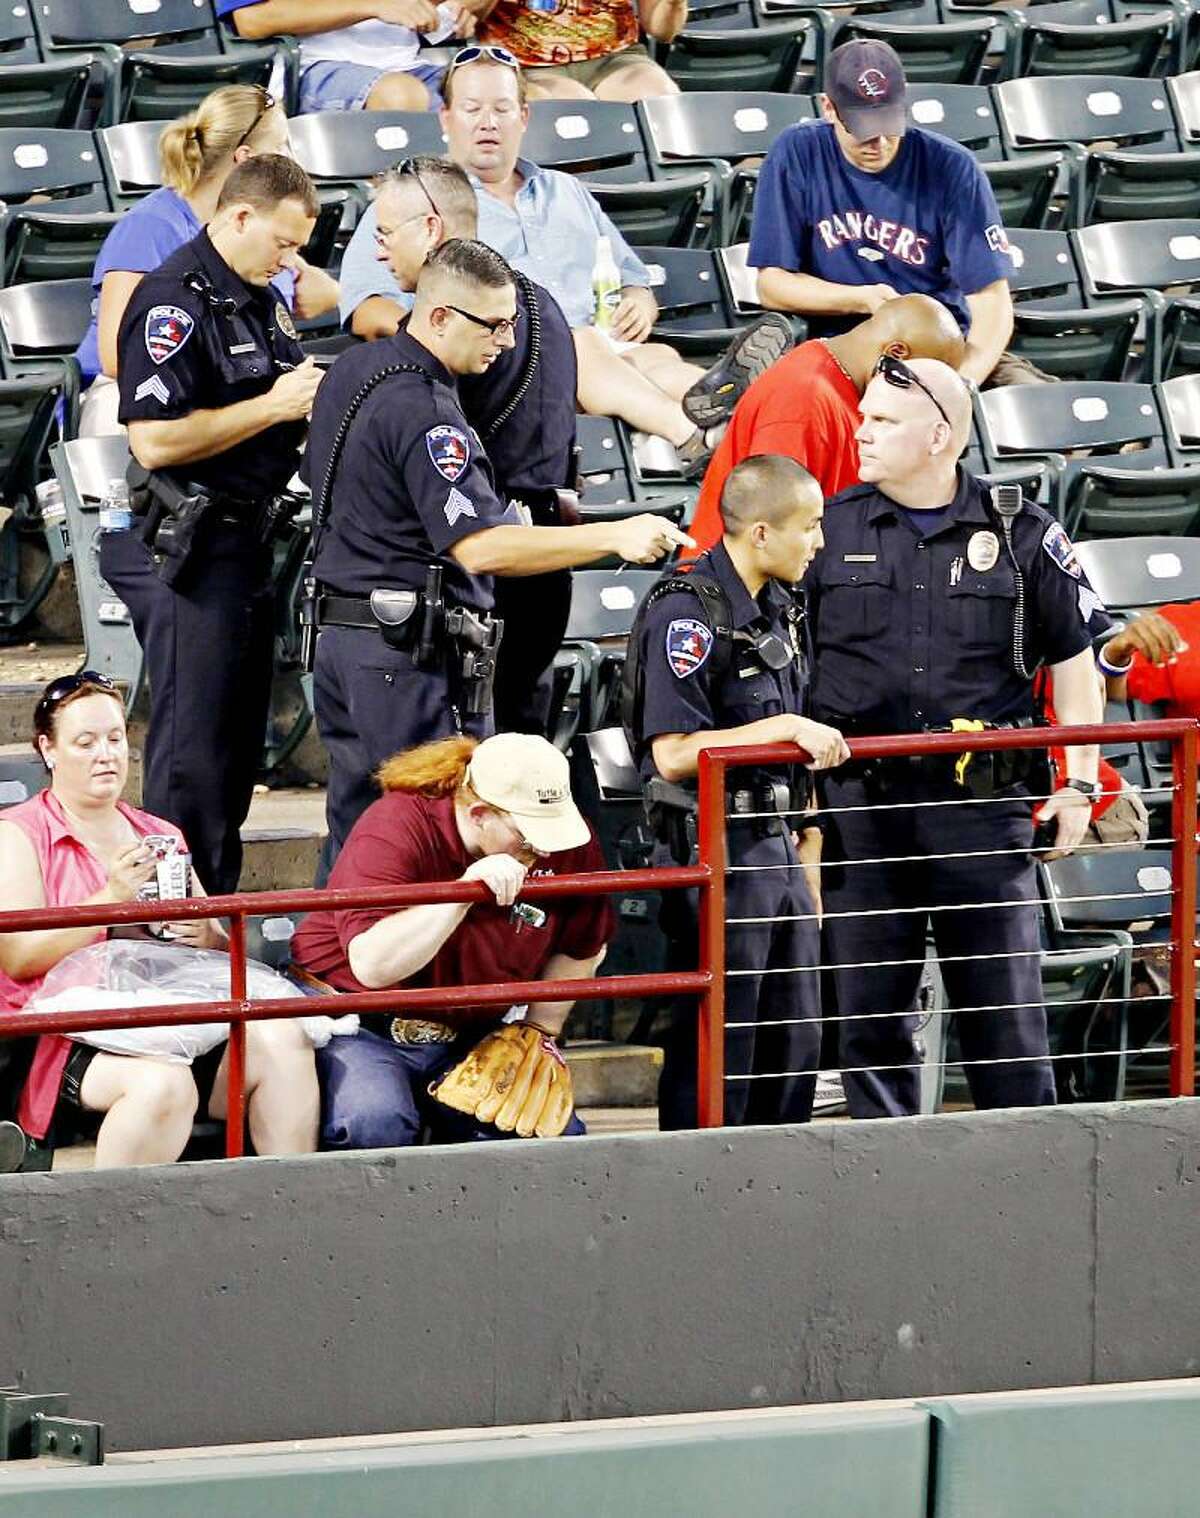 AP PHOTO/THE DALLAS MORNING NEWS/G.J. McCARTHY Arlington Police Department officers gather near where a Texas Rangers fan fell about 20 feet onto concrete reaching out for a baseball tossed his way by All-Star outfielder Josh Hamilton during a game between the Rangers and Oakland Athletics, Thursday night in Arlington, Tx. Shannon Stone, a 39-year-old firefighter from Brownwood, died at a hospital Thursday night, the Tarrant County Medical Examiner's Office said.